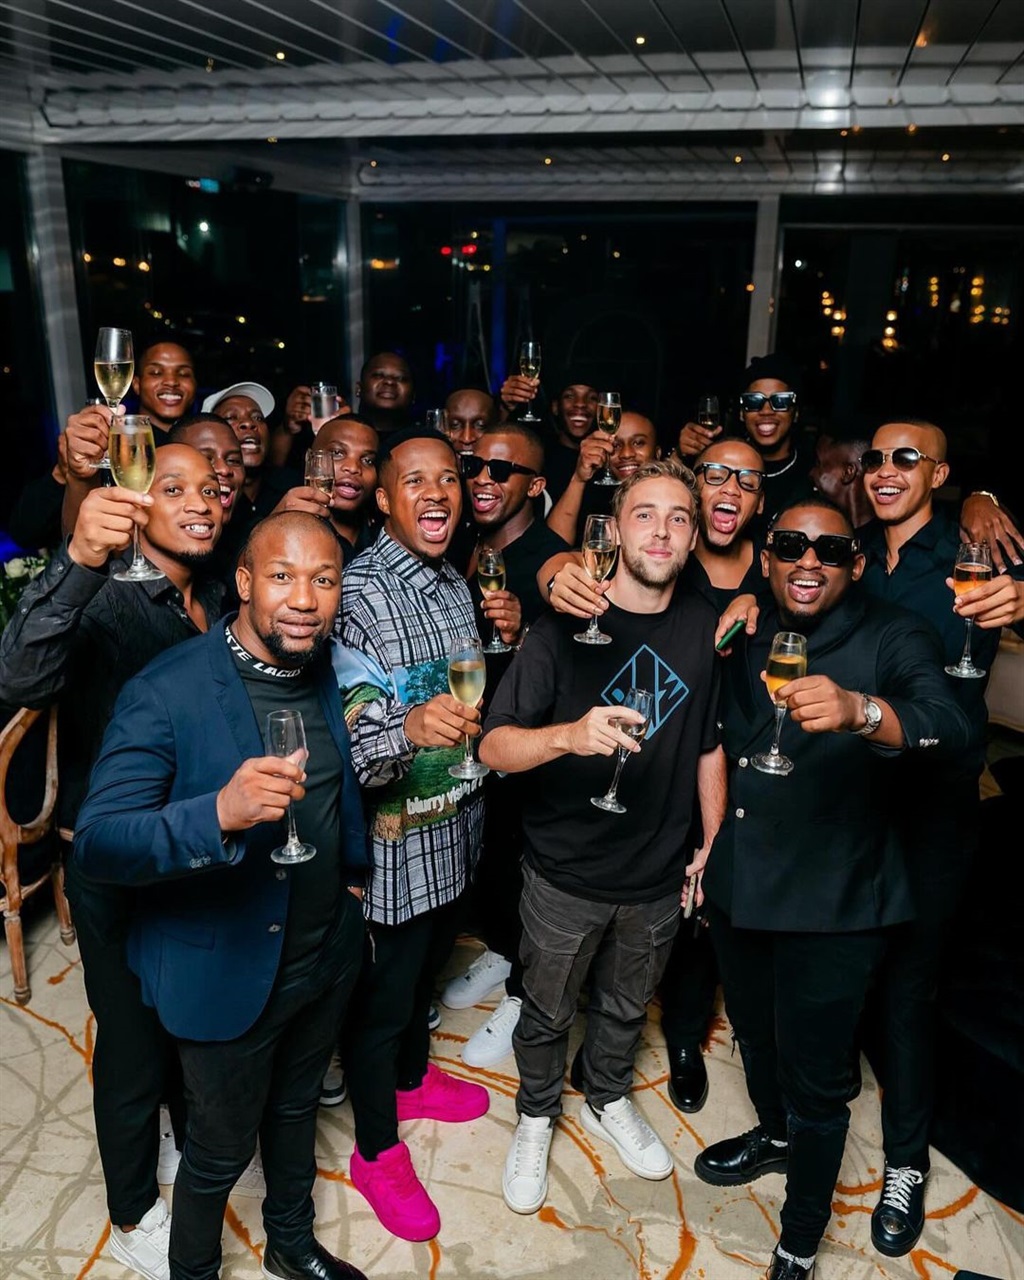 Royal AM chairman Andile Mpisane celebrated in true big baller style over the weekend. 